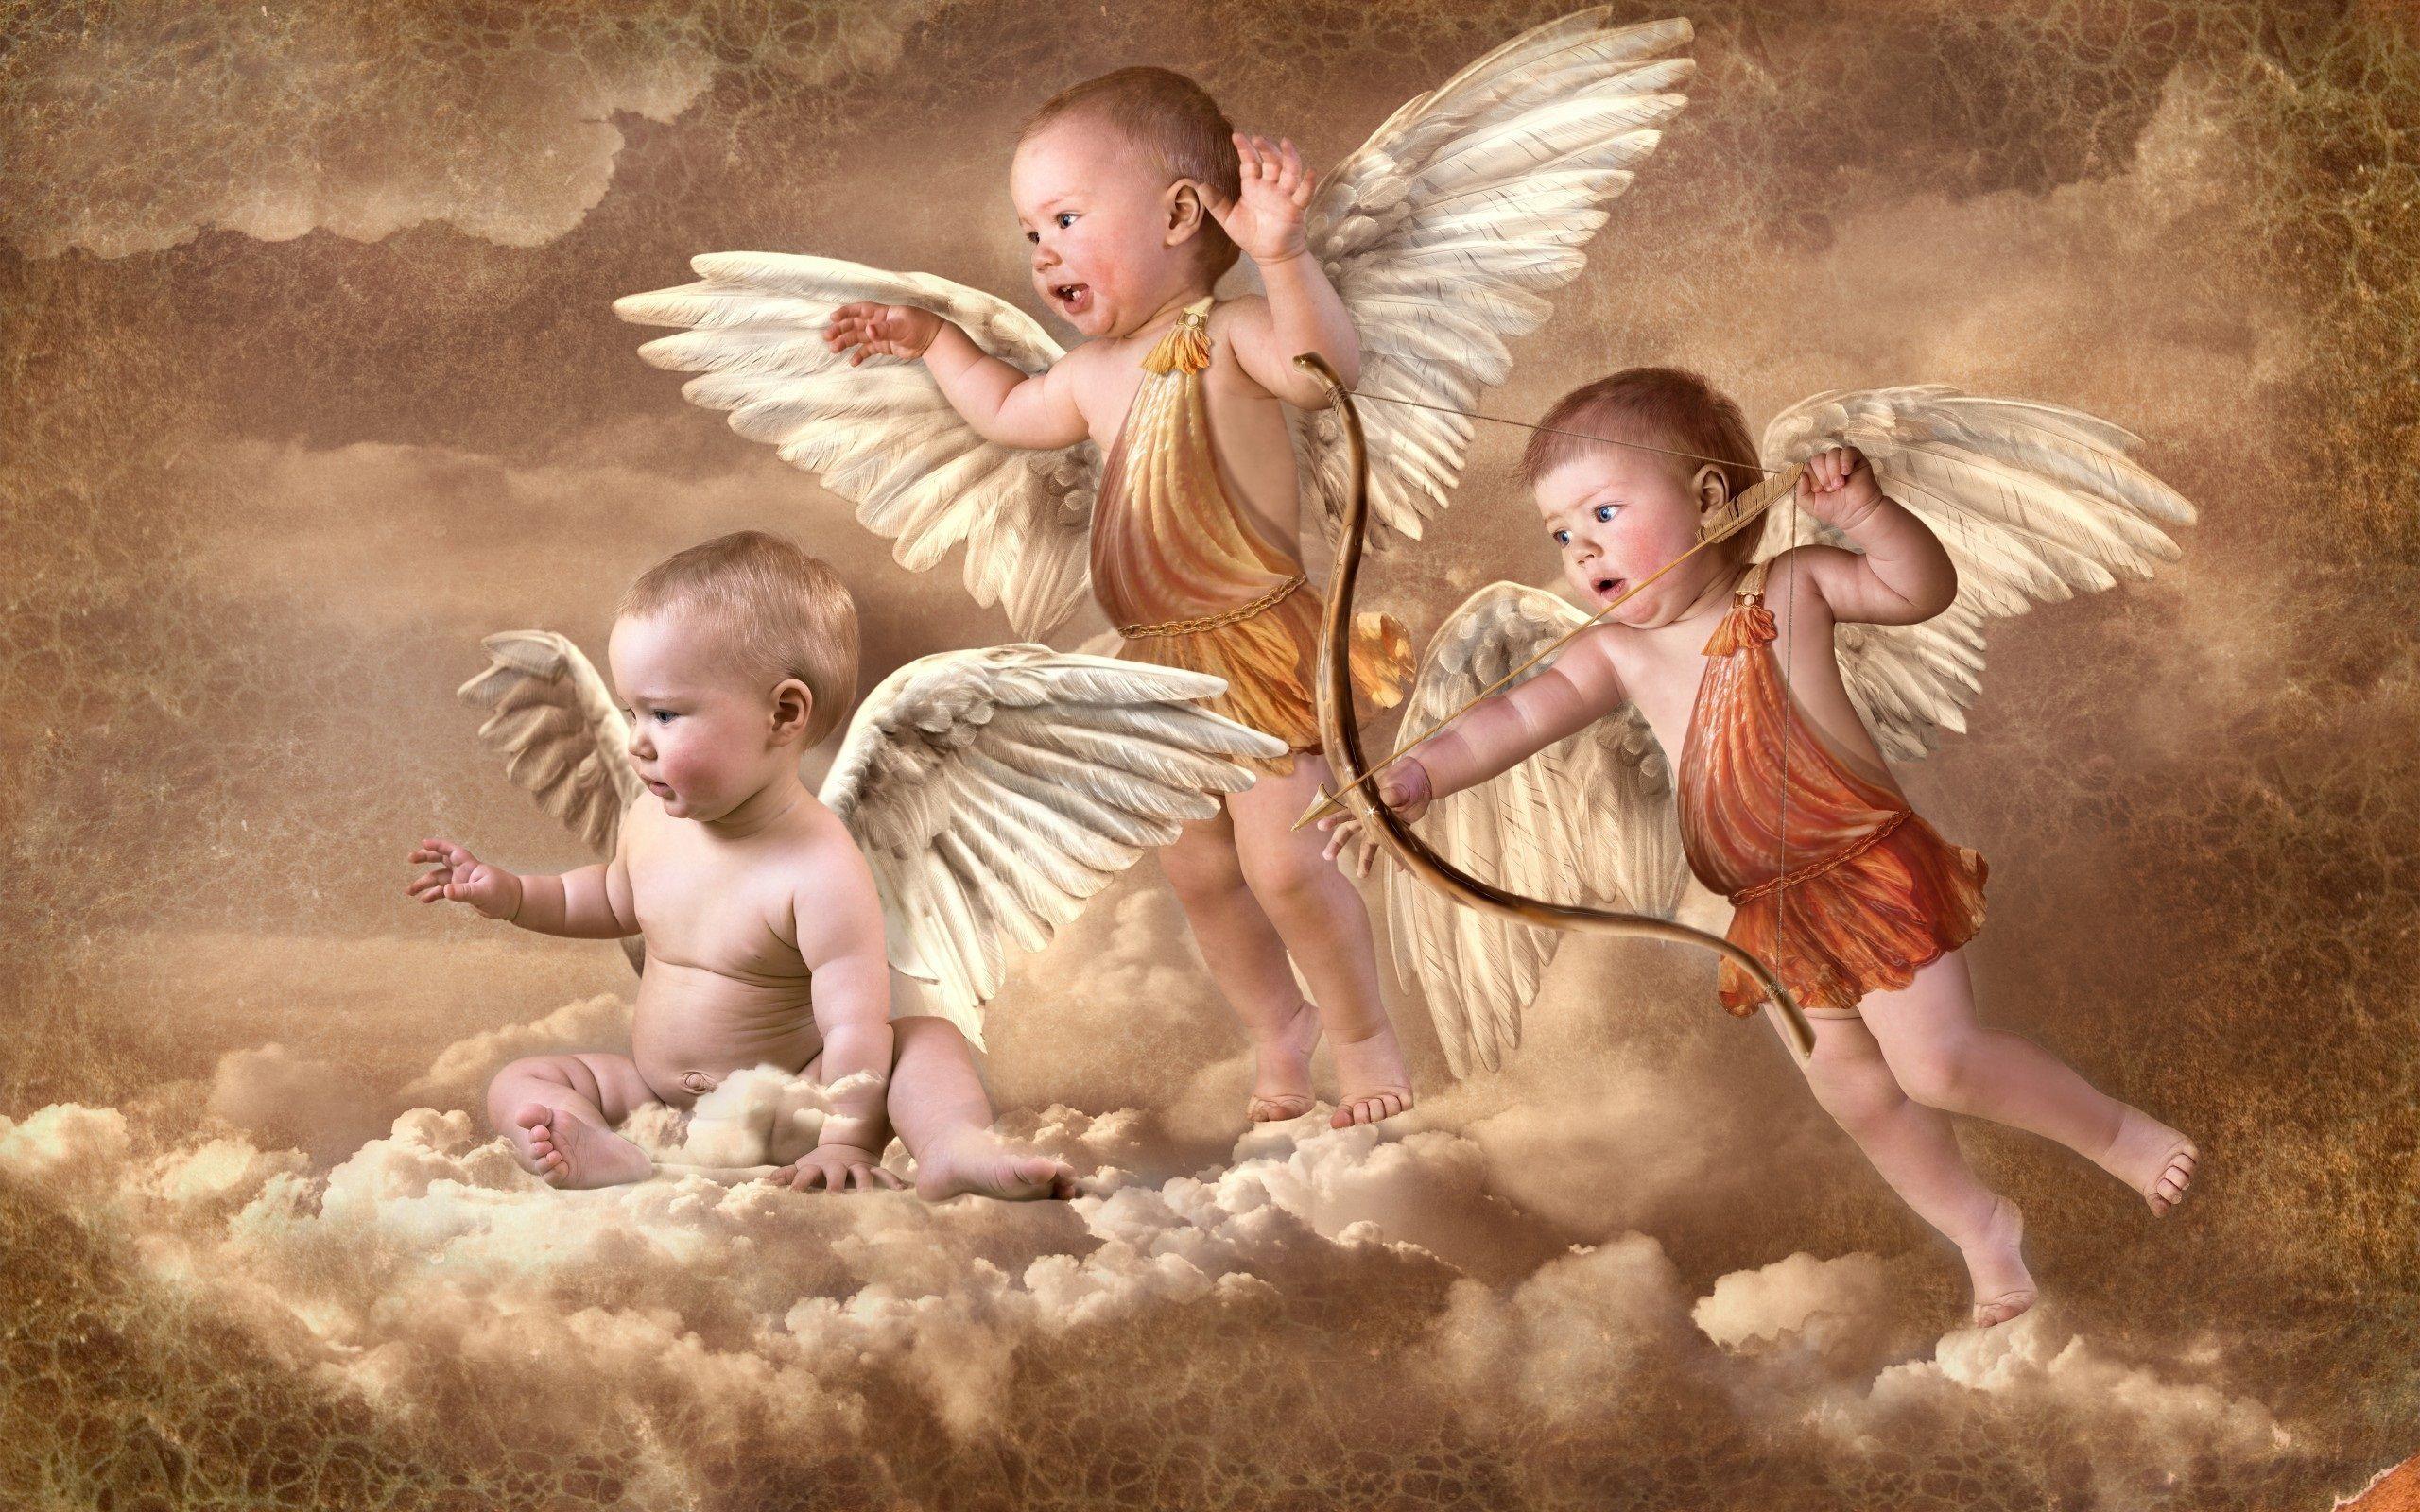 A painting of three angels in the sky - Cupid